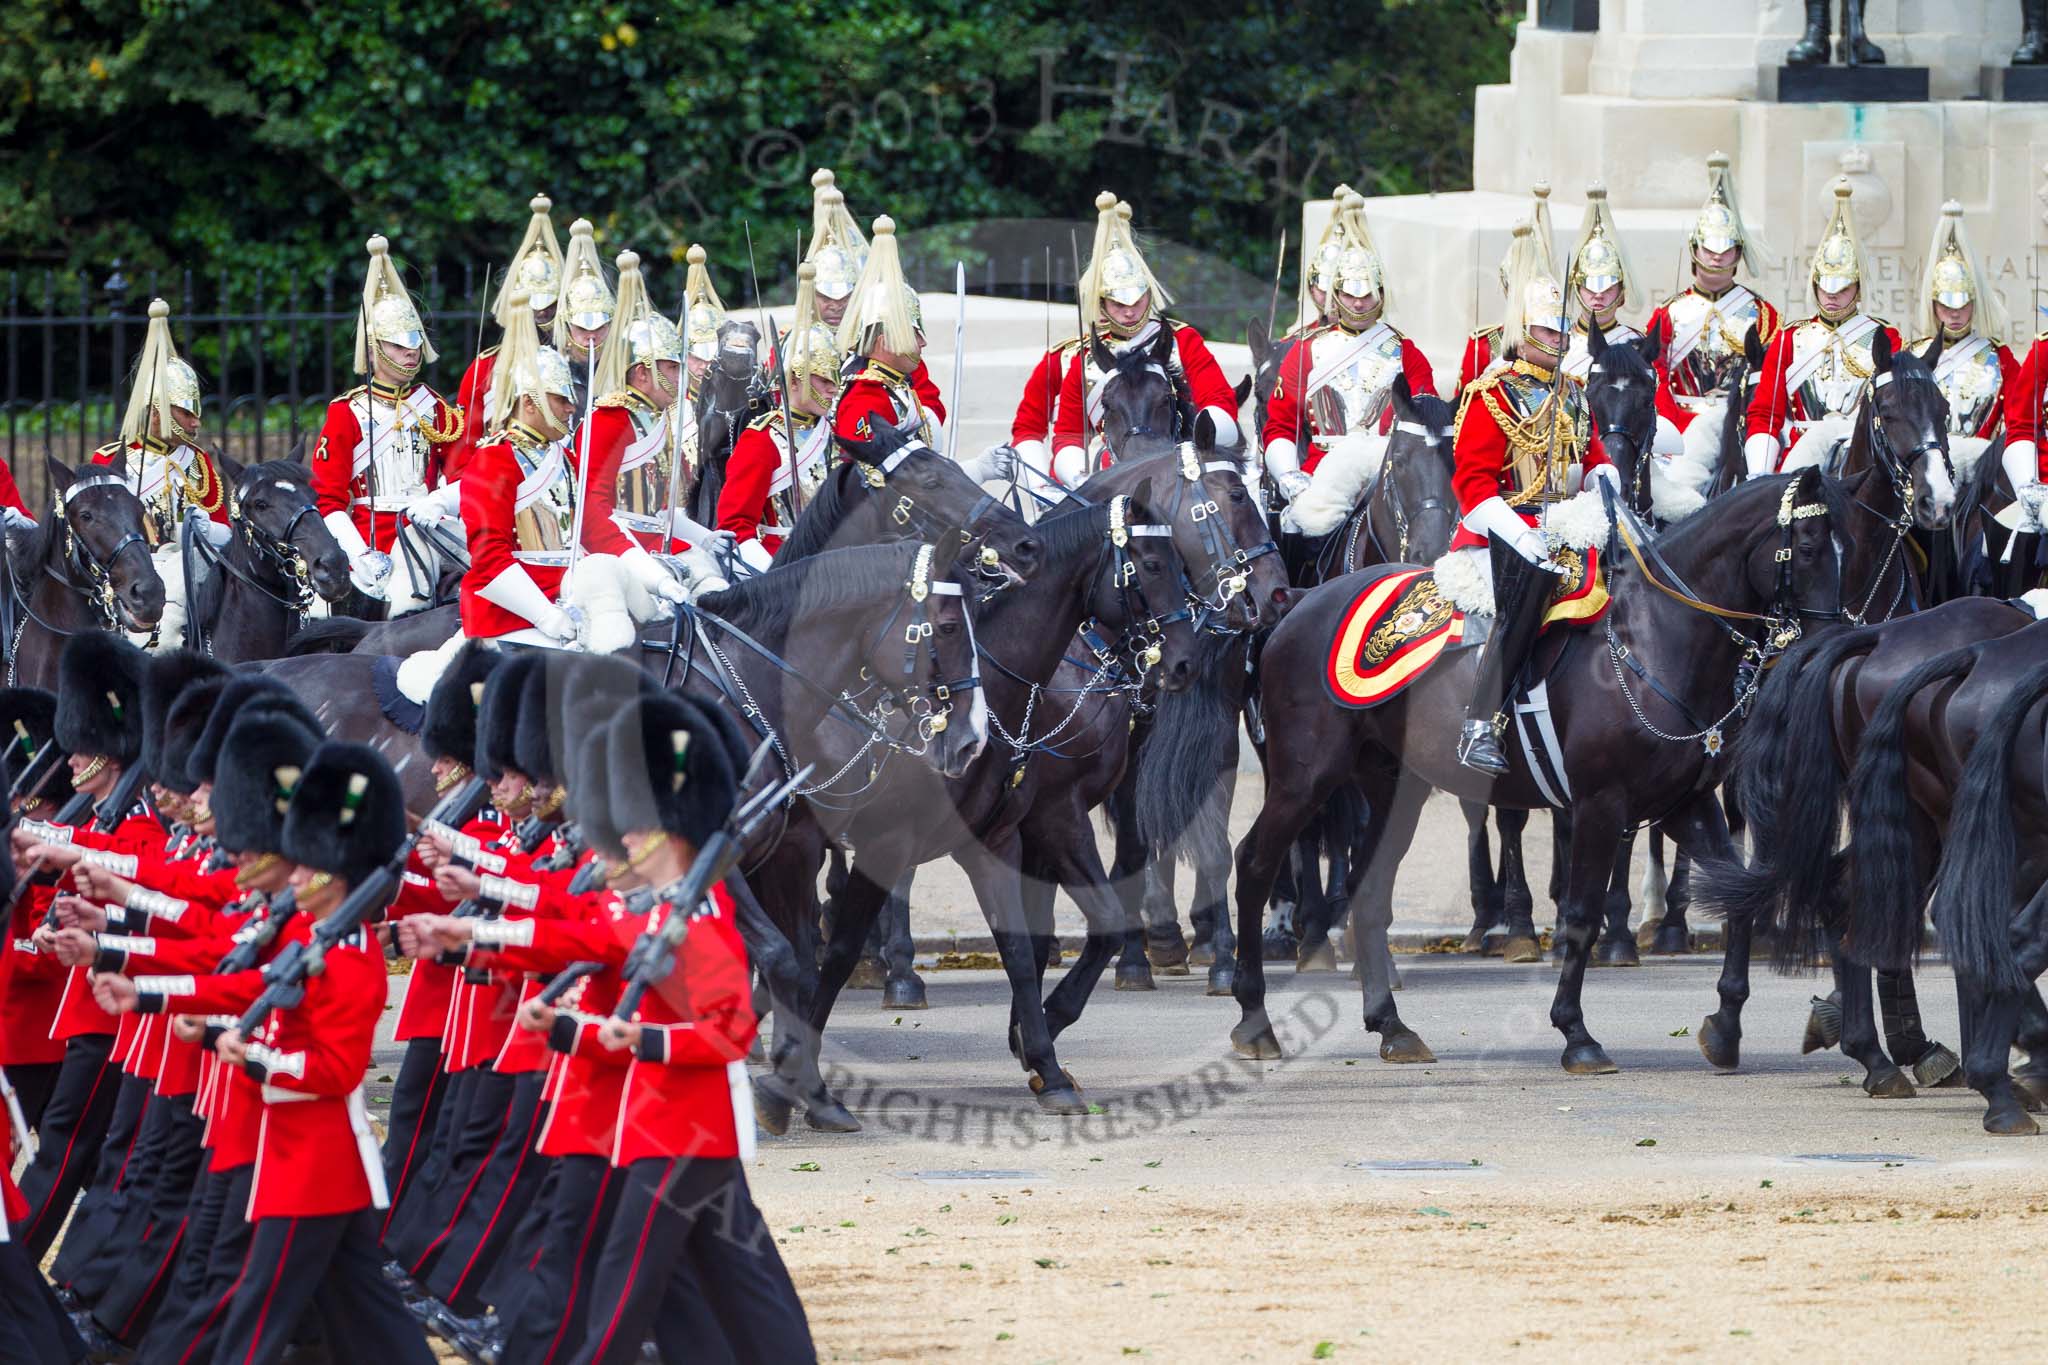 The Colonel's Review 2015.
Horse Guards Parade, Westminster,
London,

United Kingdom,
on 06 June 2015 at 12:02, image #567